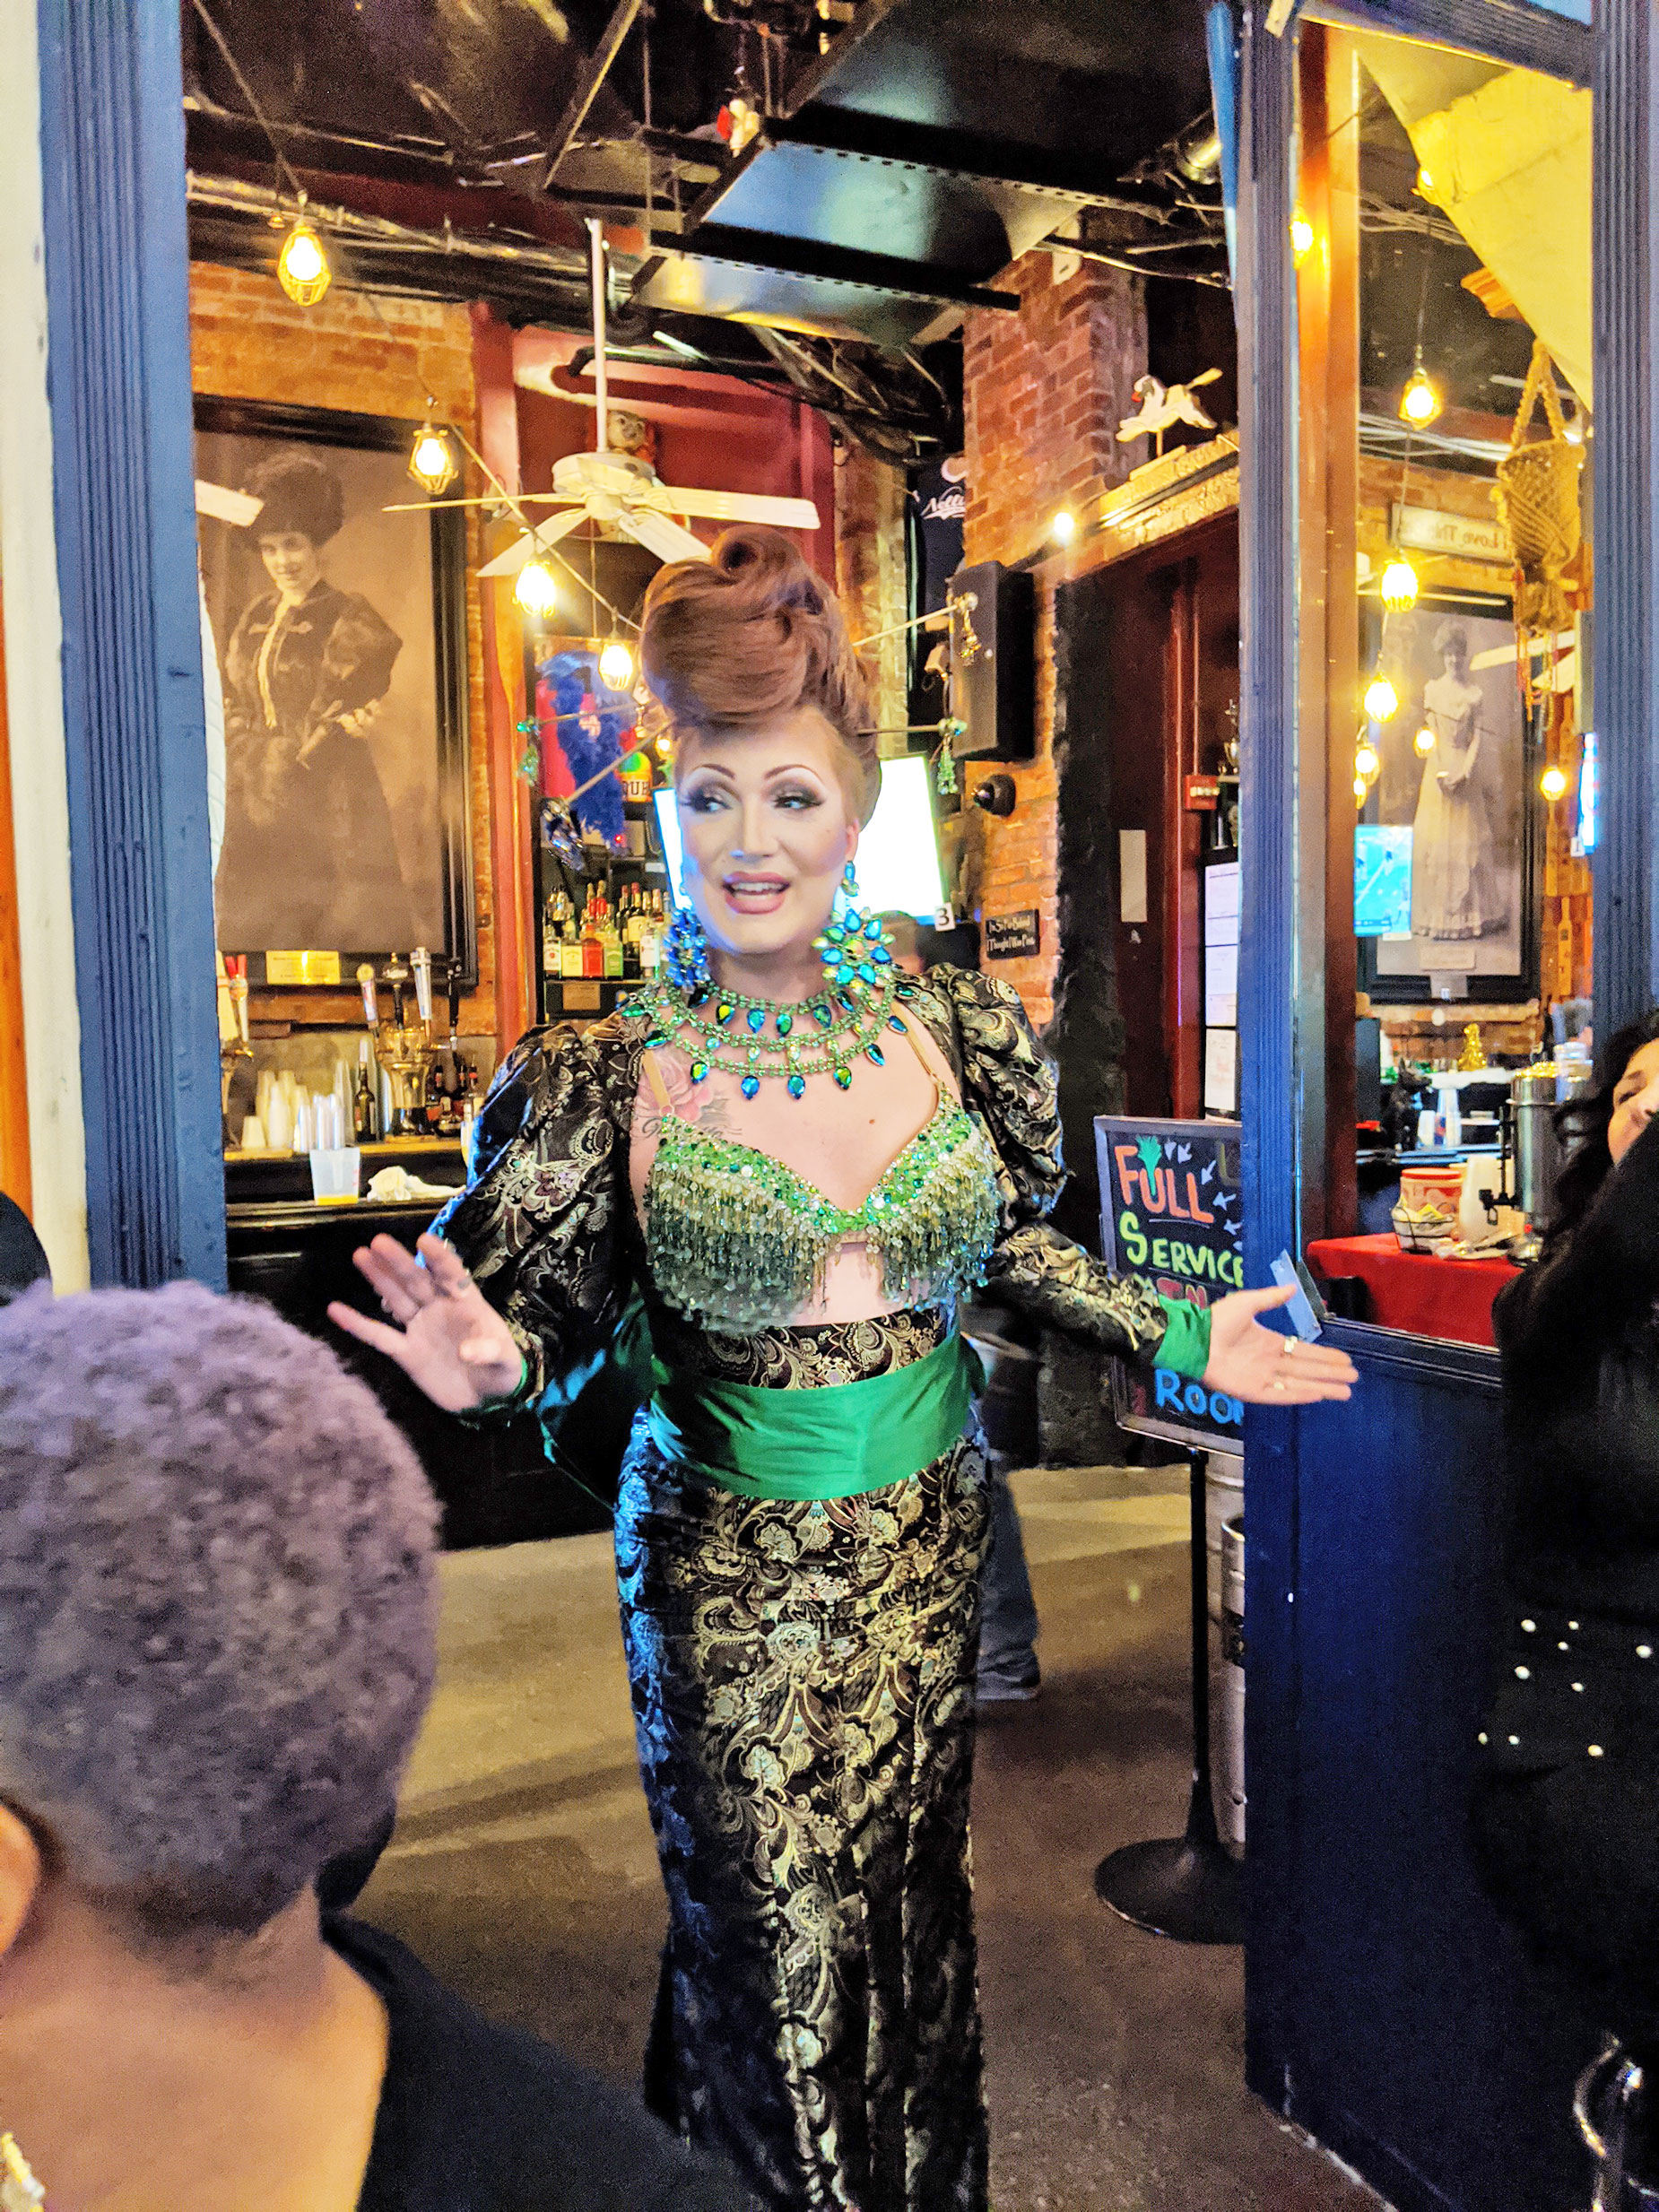 Holly Whatt Performing at Chanellie's Drag Brunch.